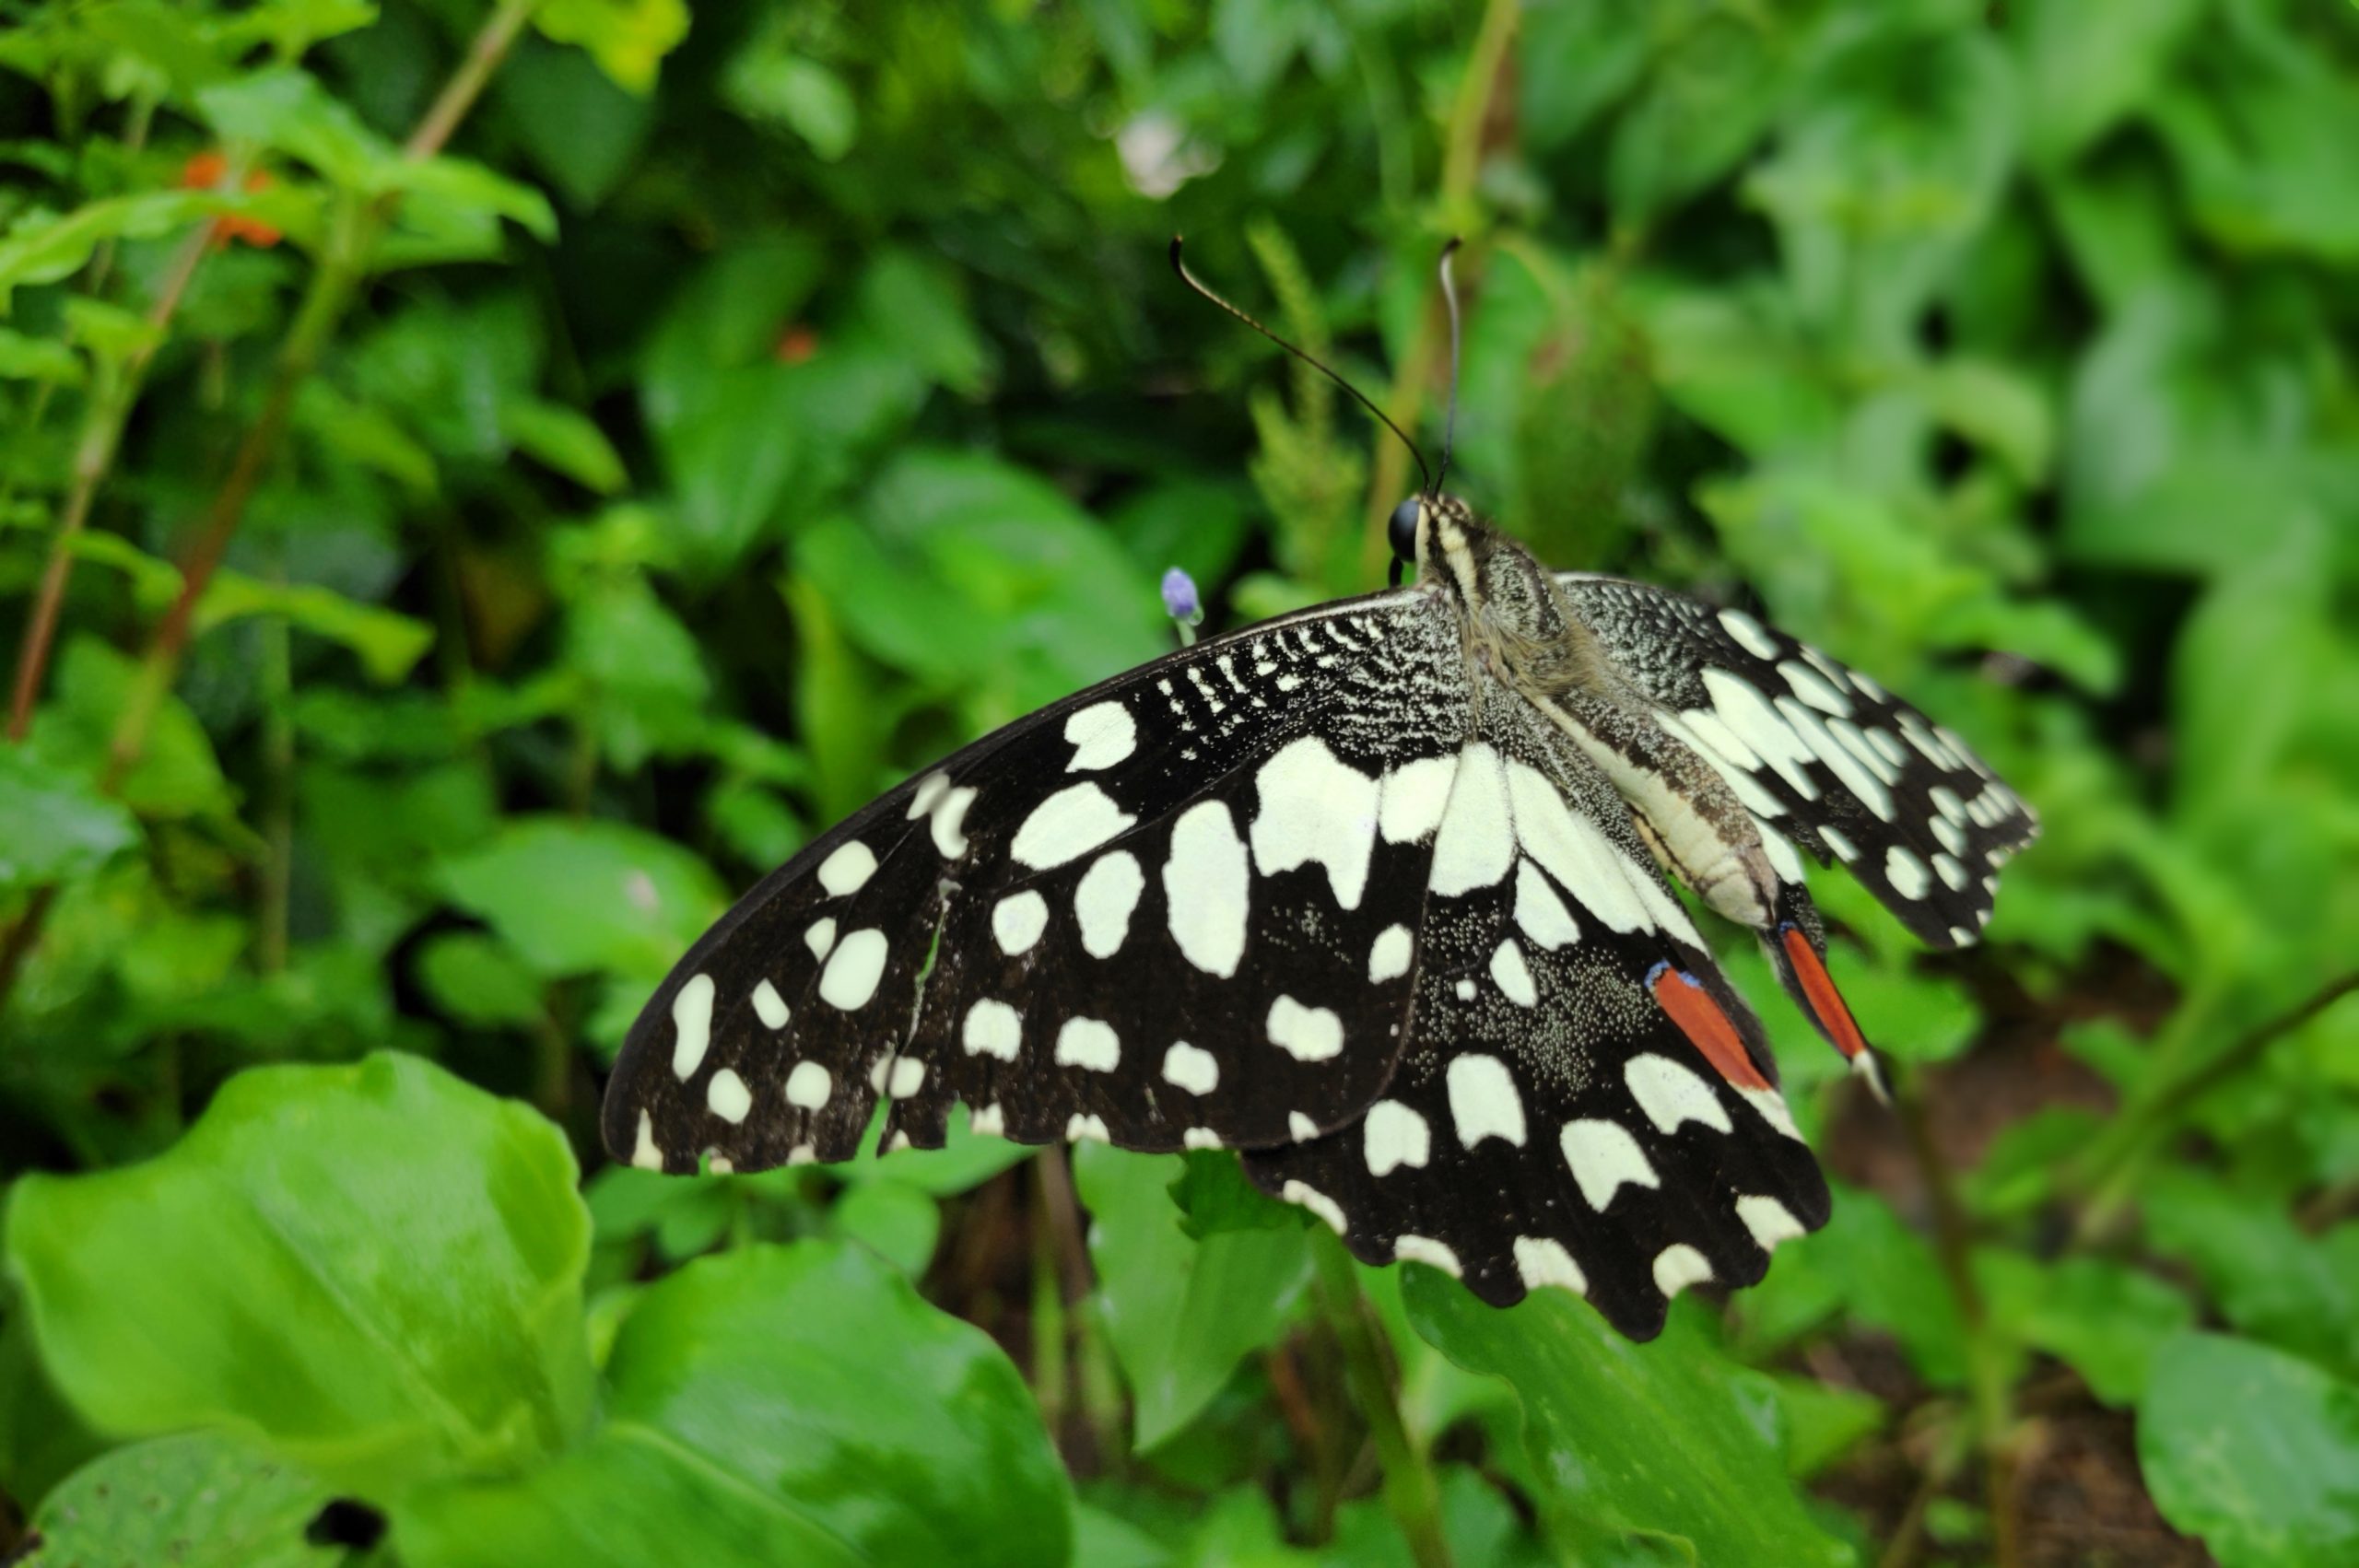 A Lime Swallowtail Butterfly